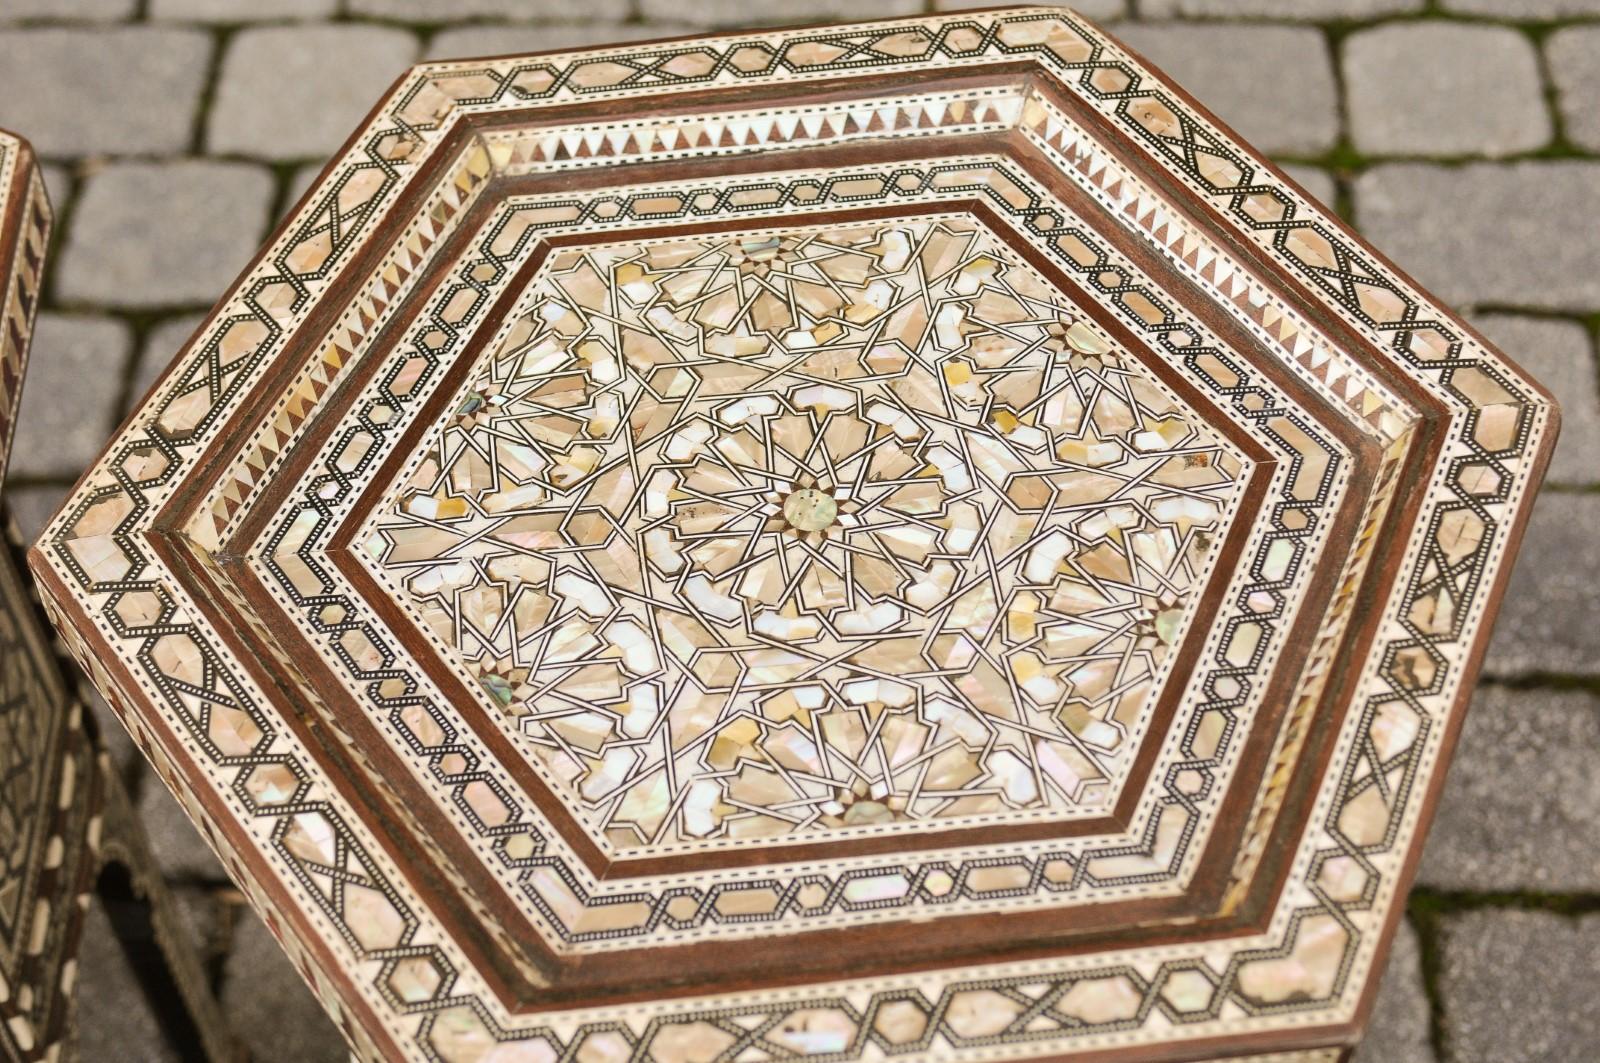 20th Century Moorish Style Syrian Hexagonal Side Tables with Mother of Pearl and Bone Inlay